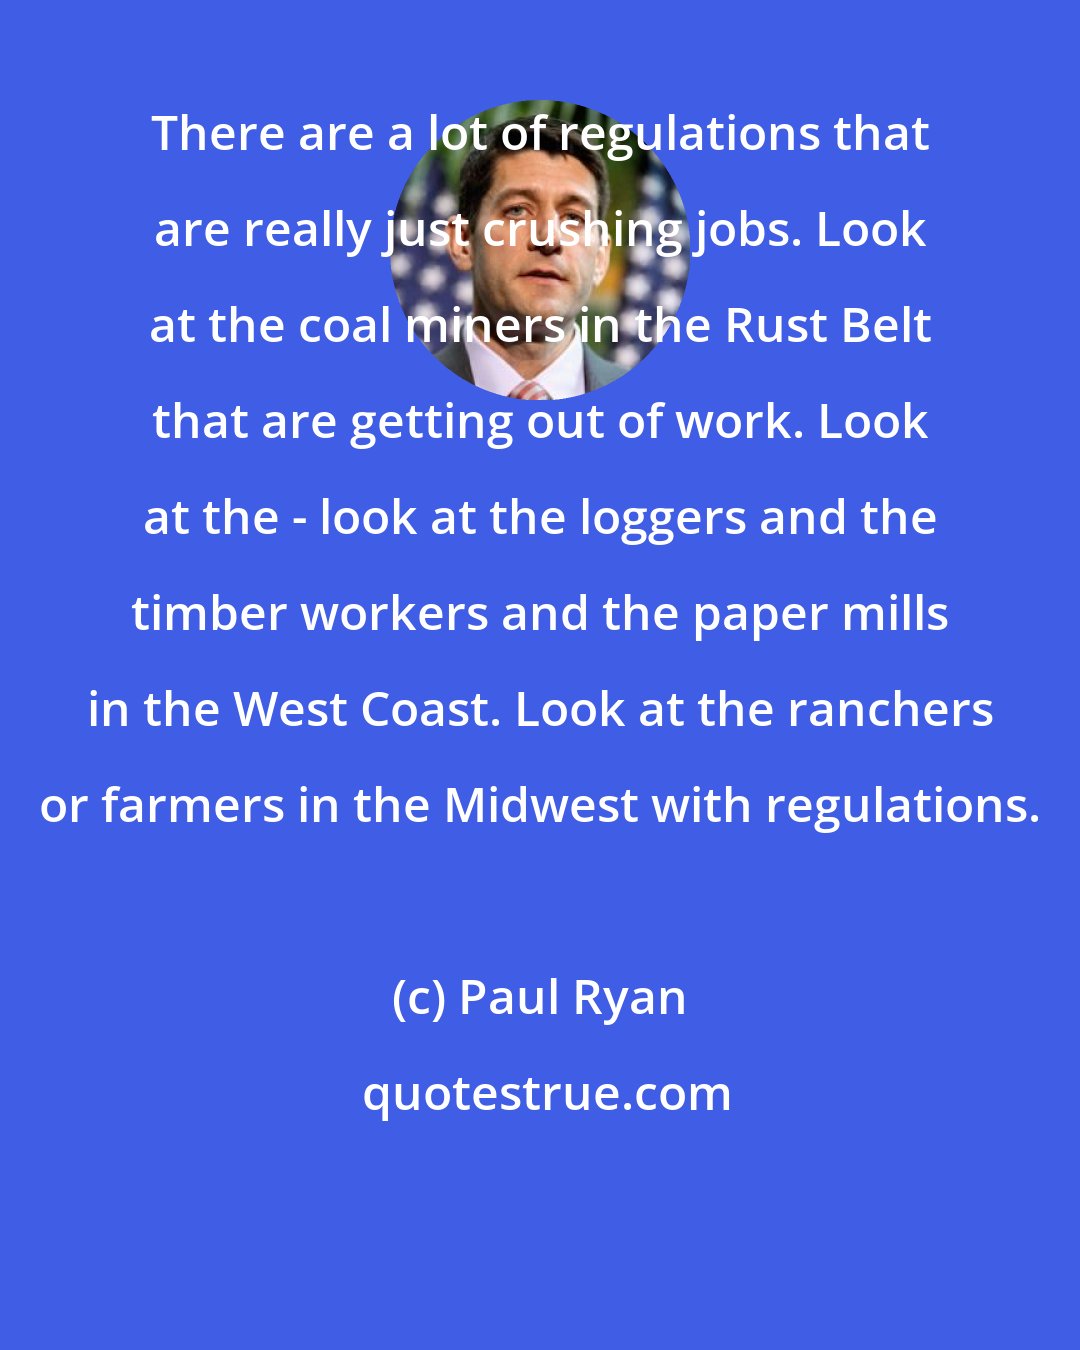 Paul Ryan: There are a lot of regulations that are really just crushing jobs. Look at the coal miners in the Rust Belt that are getting out of work. Look at the - look at the loggers and the timber workers and the paper mills in the West Coast. Look at the ranchers or farmers in the Midwest with regulations.